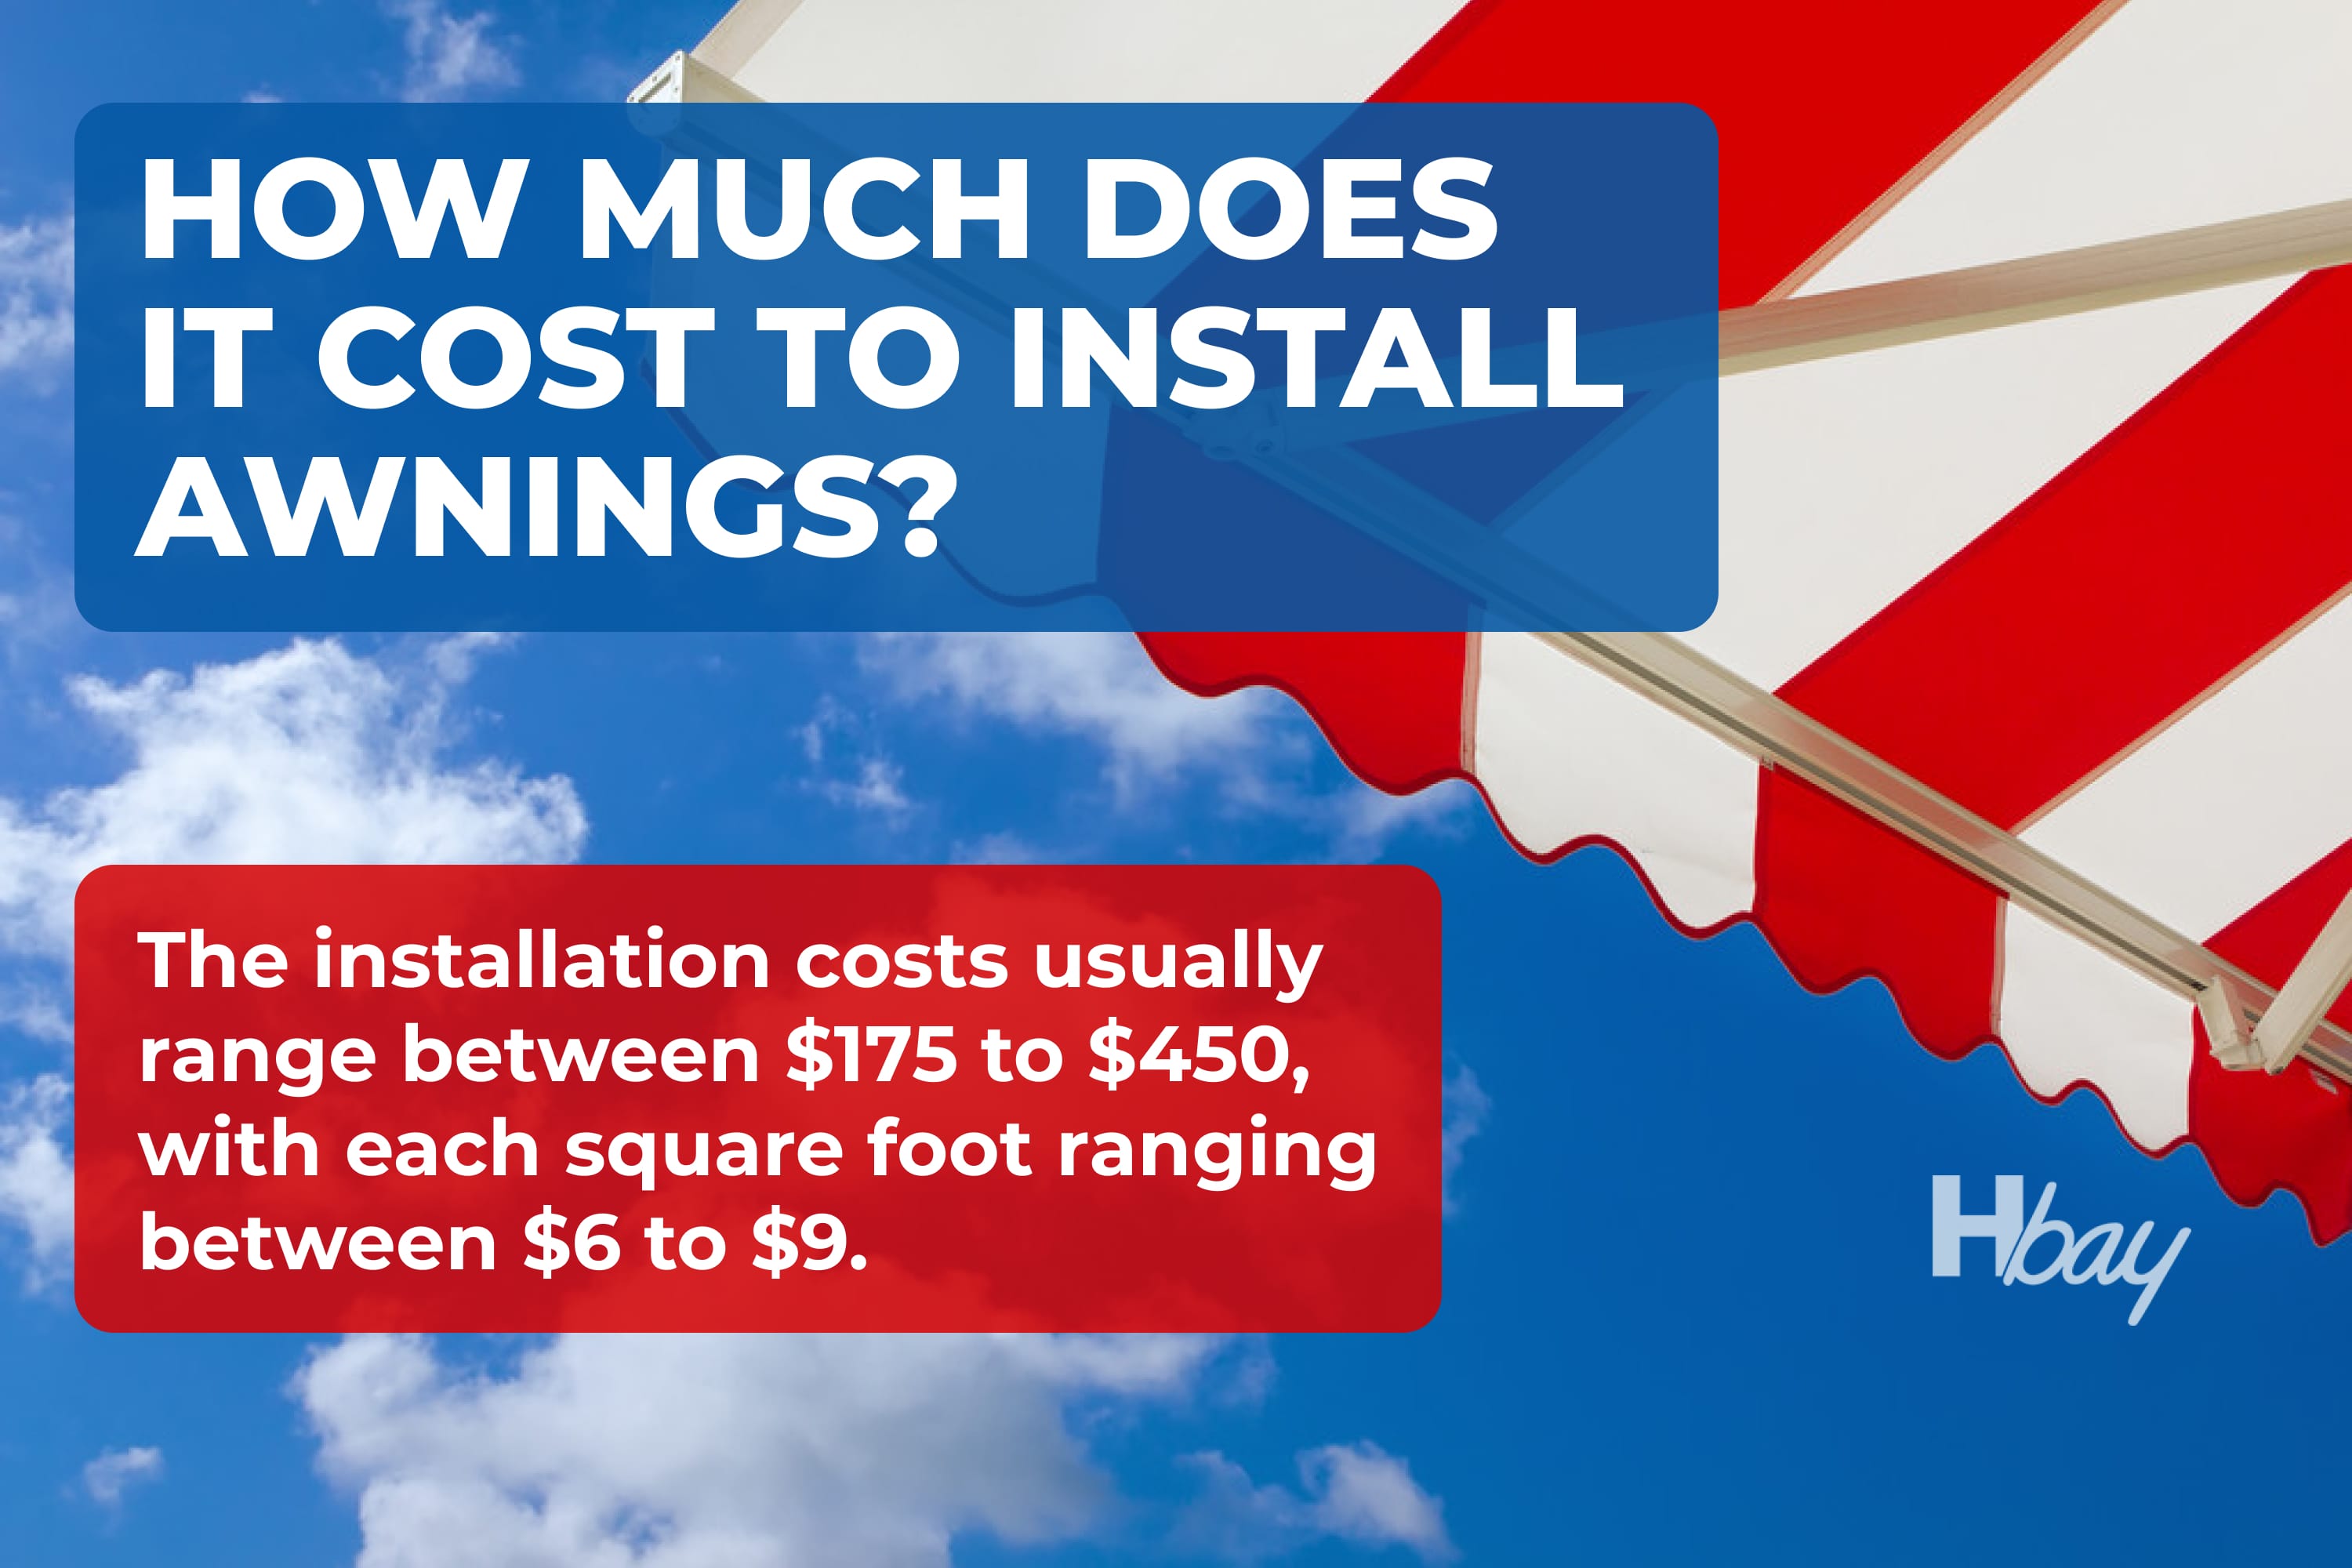 How much does it cost to install awnings